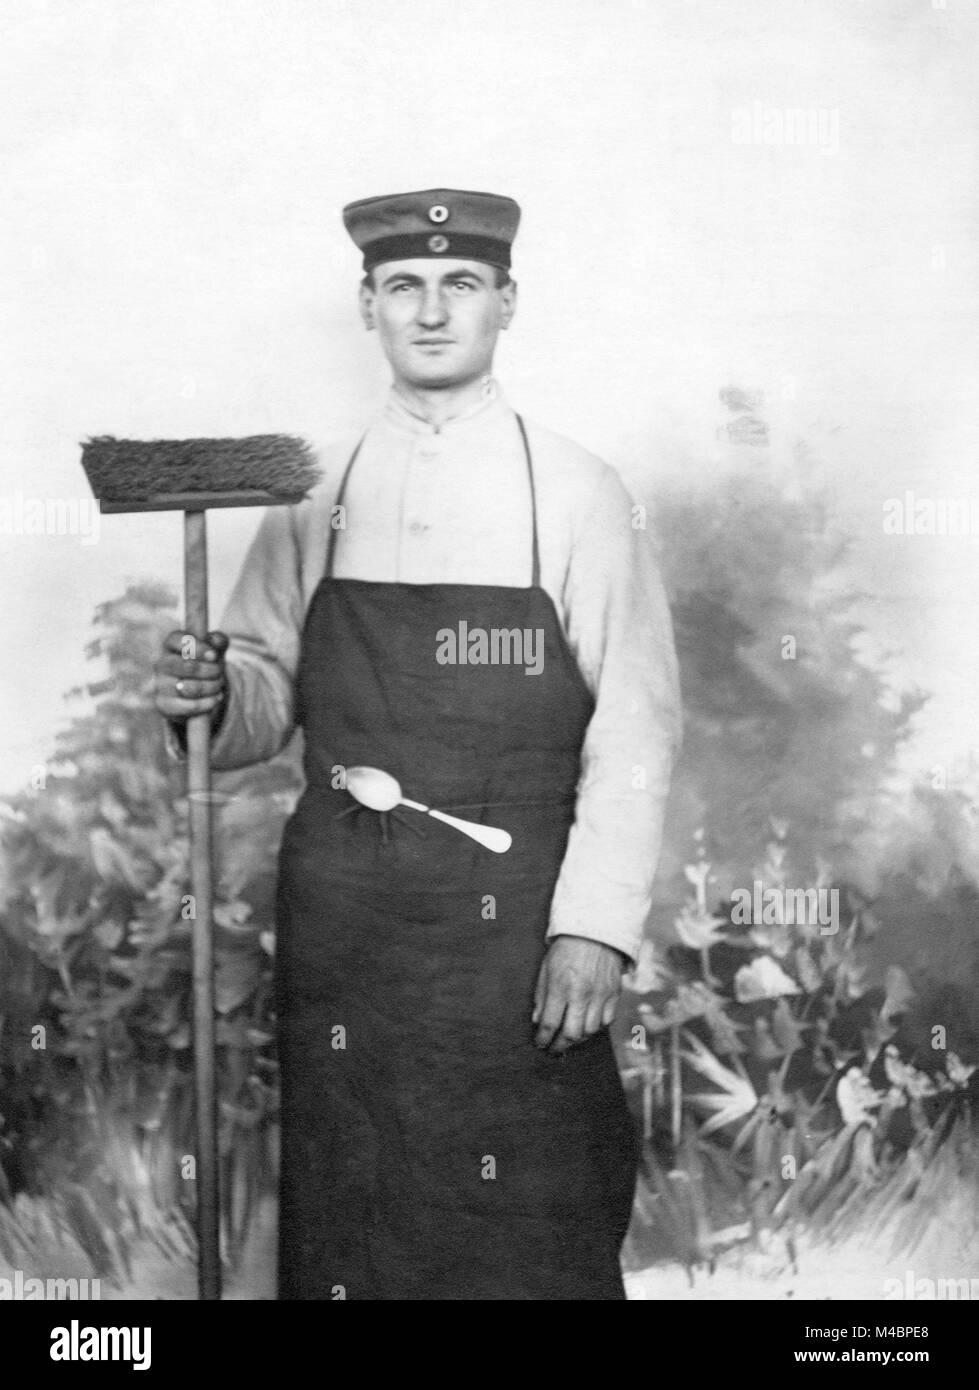 Soldier with broom and spoon,kitchen service,1910s,exact place unknown,Germany Stock Photo